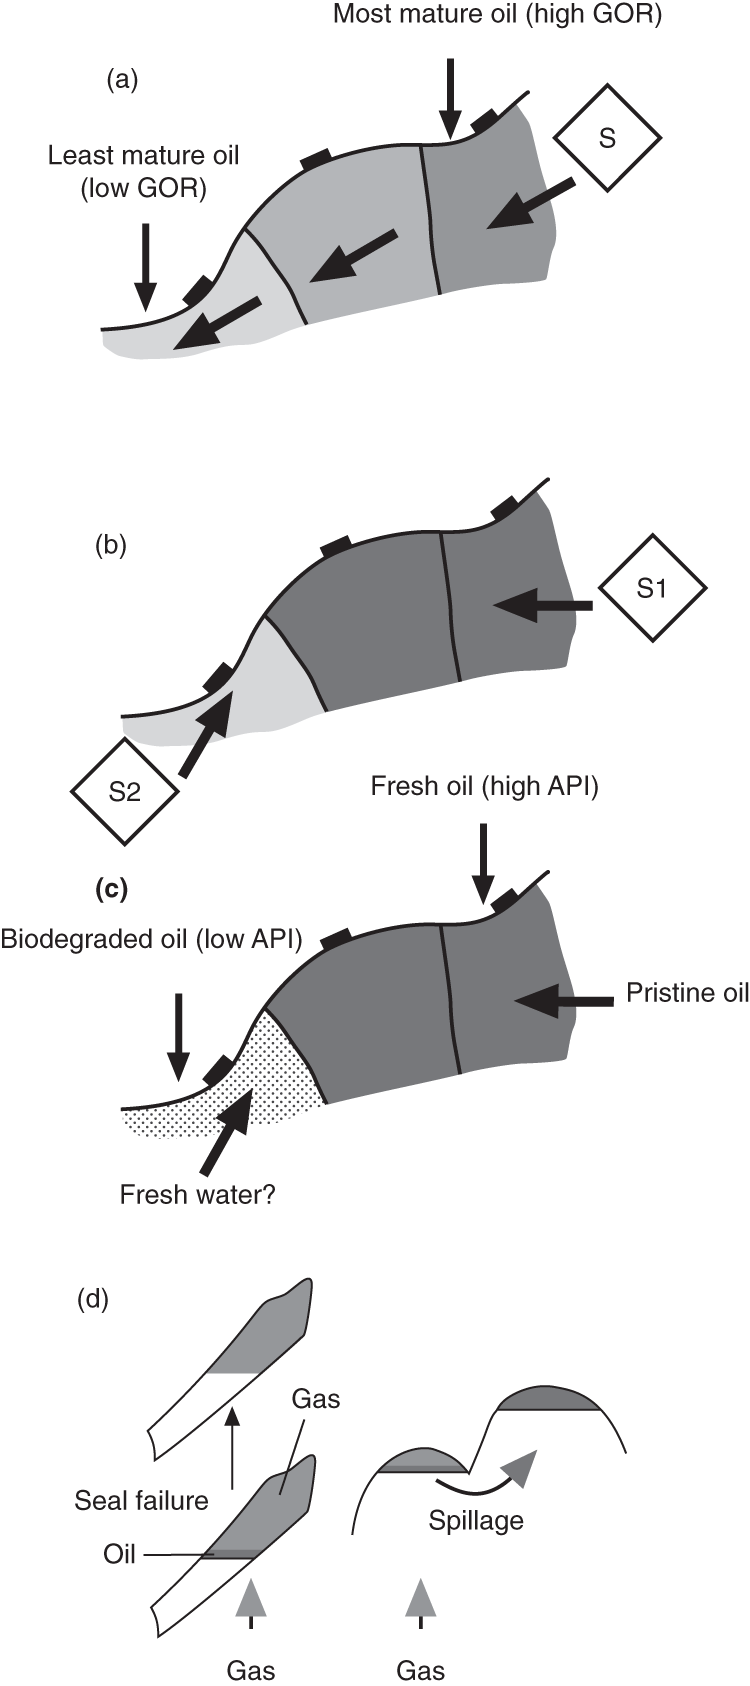 Intra-field petroleum variations. (a) Inherited differences due to filling from one source kitchen.  (b) Inherited differences caused by the presence of two source-rock kitchens. (c) The effect of biodegradation on reservoired oil. (d) A cross-section illustrating seal failure and leakage causing compositional changes in reservoired oil.